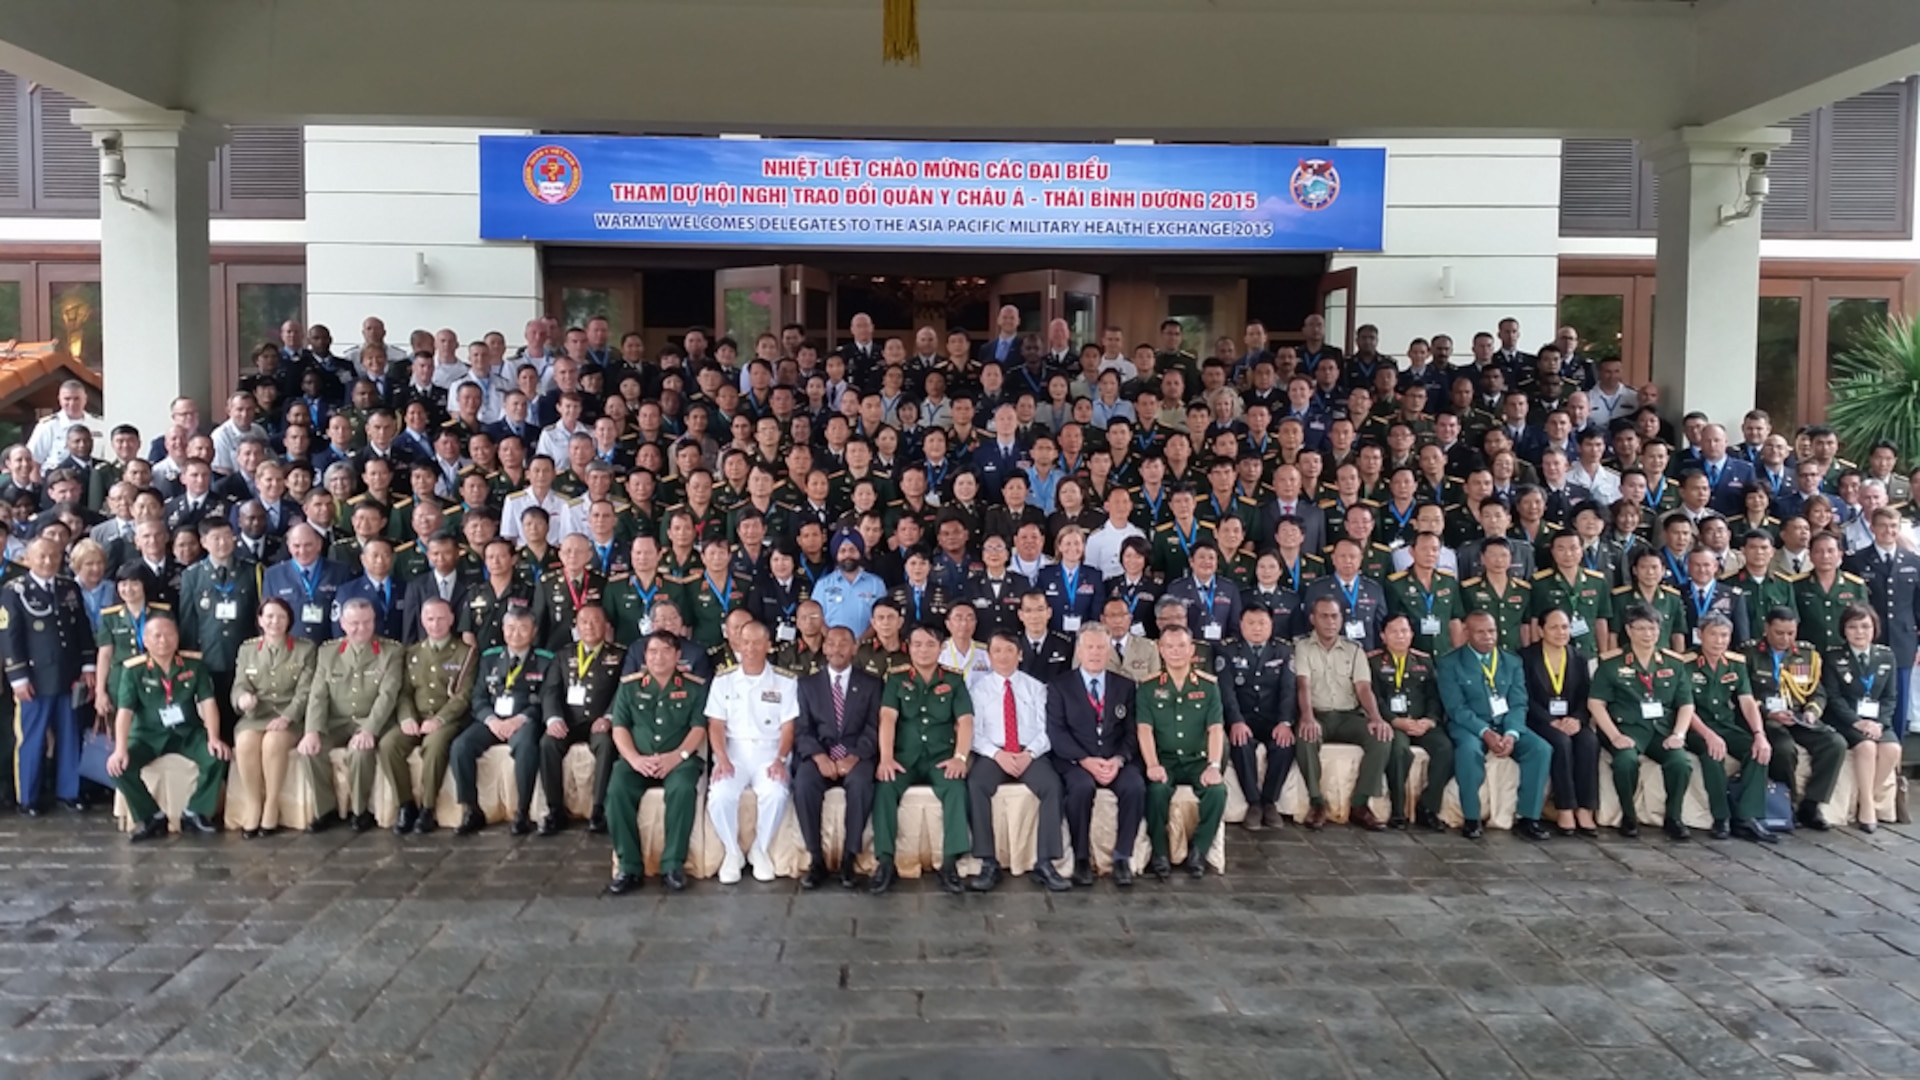 DA NANG, Vietnam (Sept. 14, 2015) - The Vietnam People's Army and the United States Pacific Command are co-hosting the Asia Pacific Military Health Exchange (APMHE) in Da Nang, Vietnam, 14-18 September 2015. The APMHE will provide an opportunity to share emerging and recent scientific information and to discuss regional issues and concerns of military health significance. The event will include more than 400 participants from 23 nations in the Indo-Asia-Pacific region. 